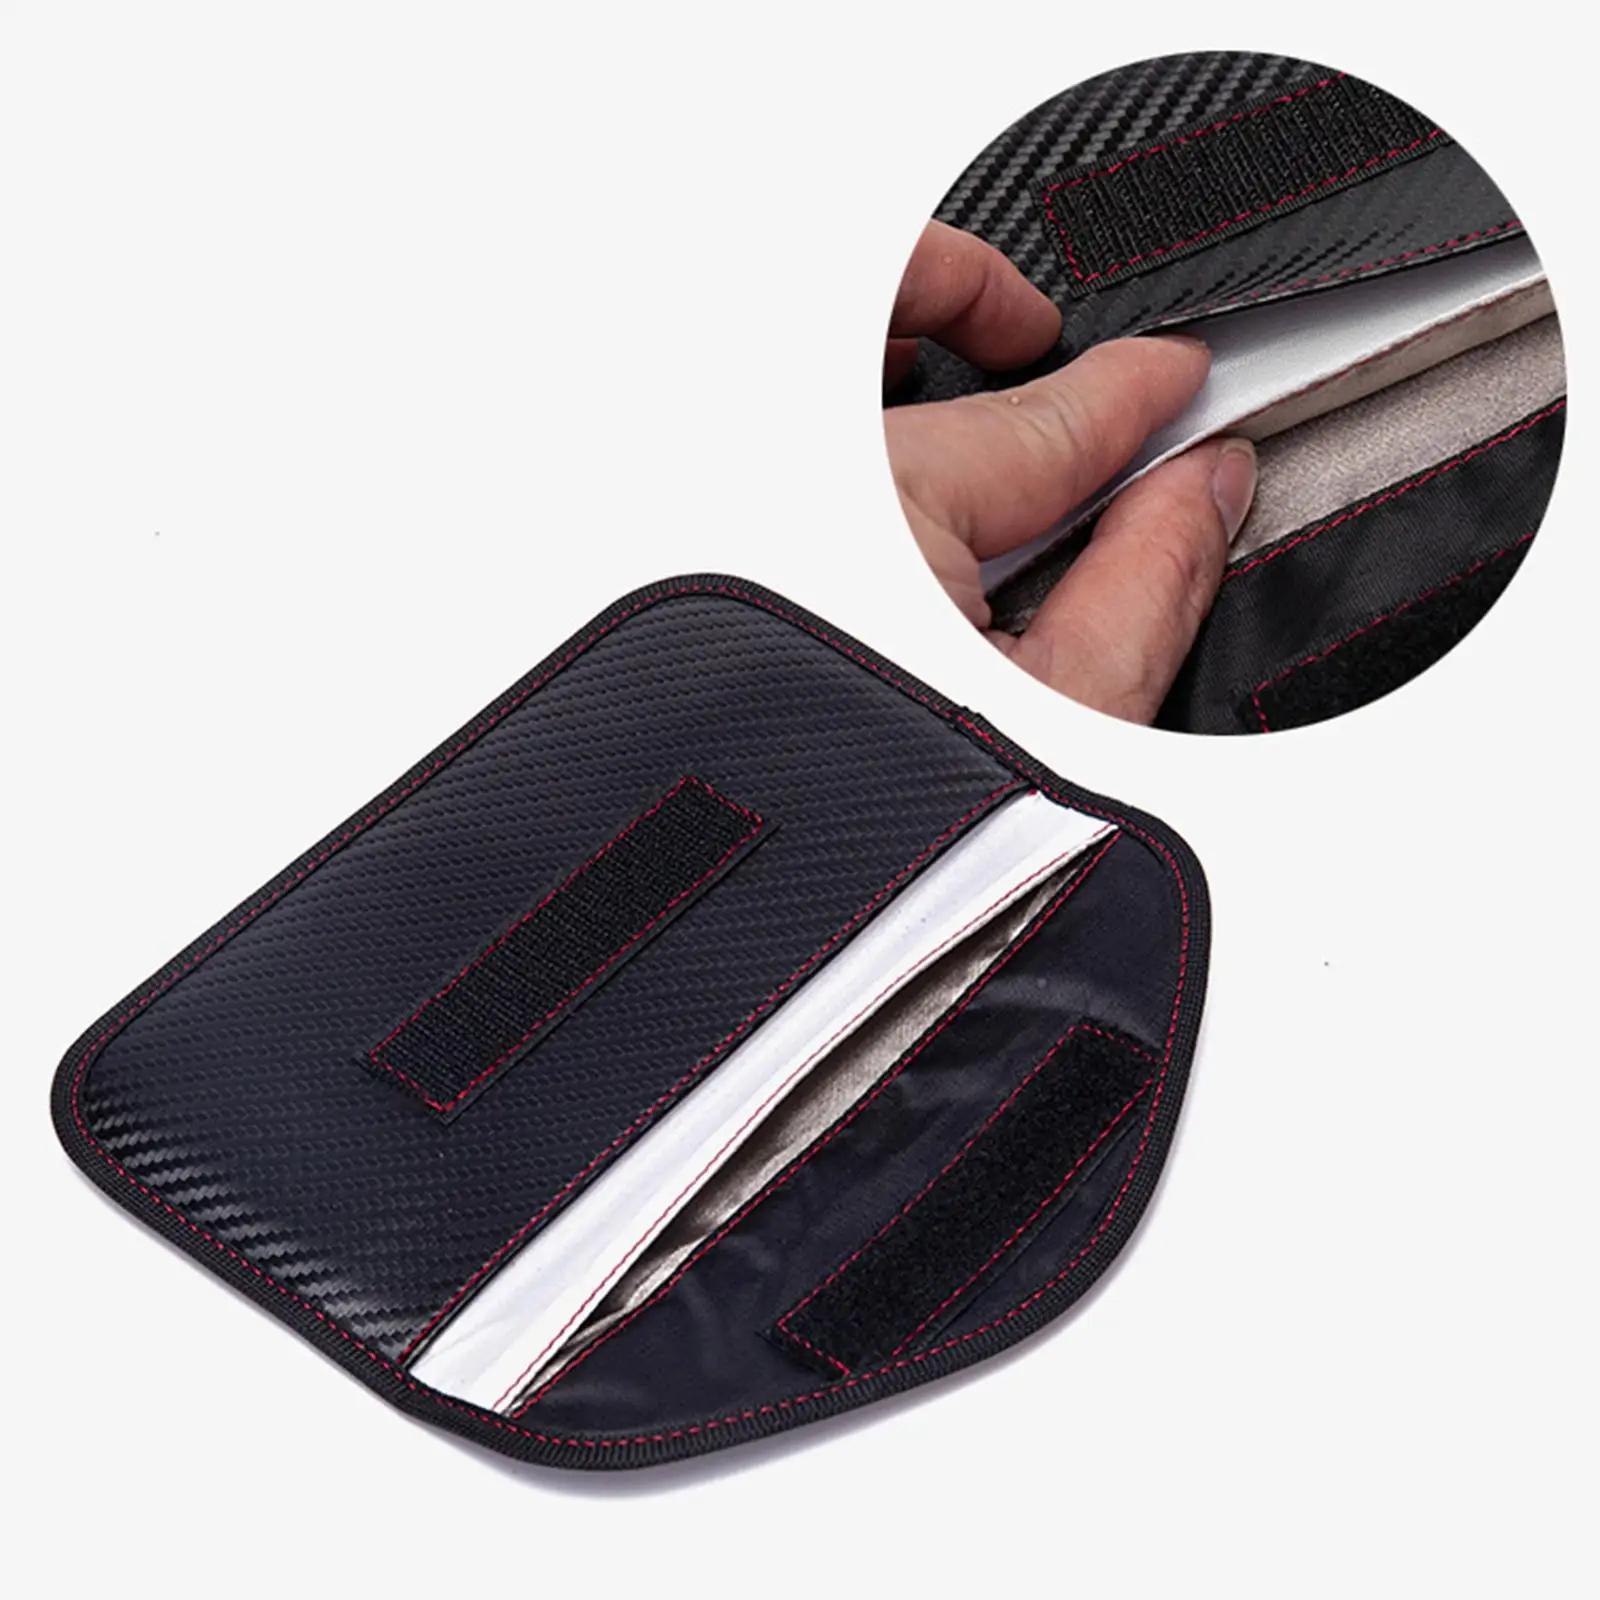 Shielding Pouch Case Faraday Bag for Cell Phone